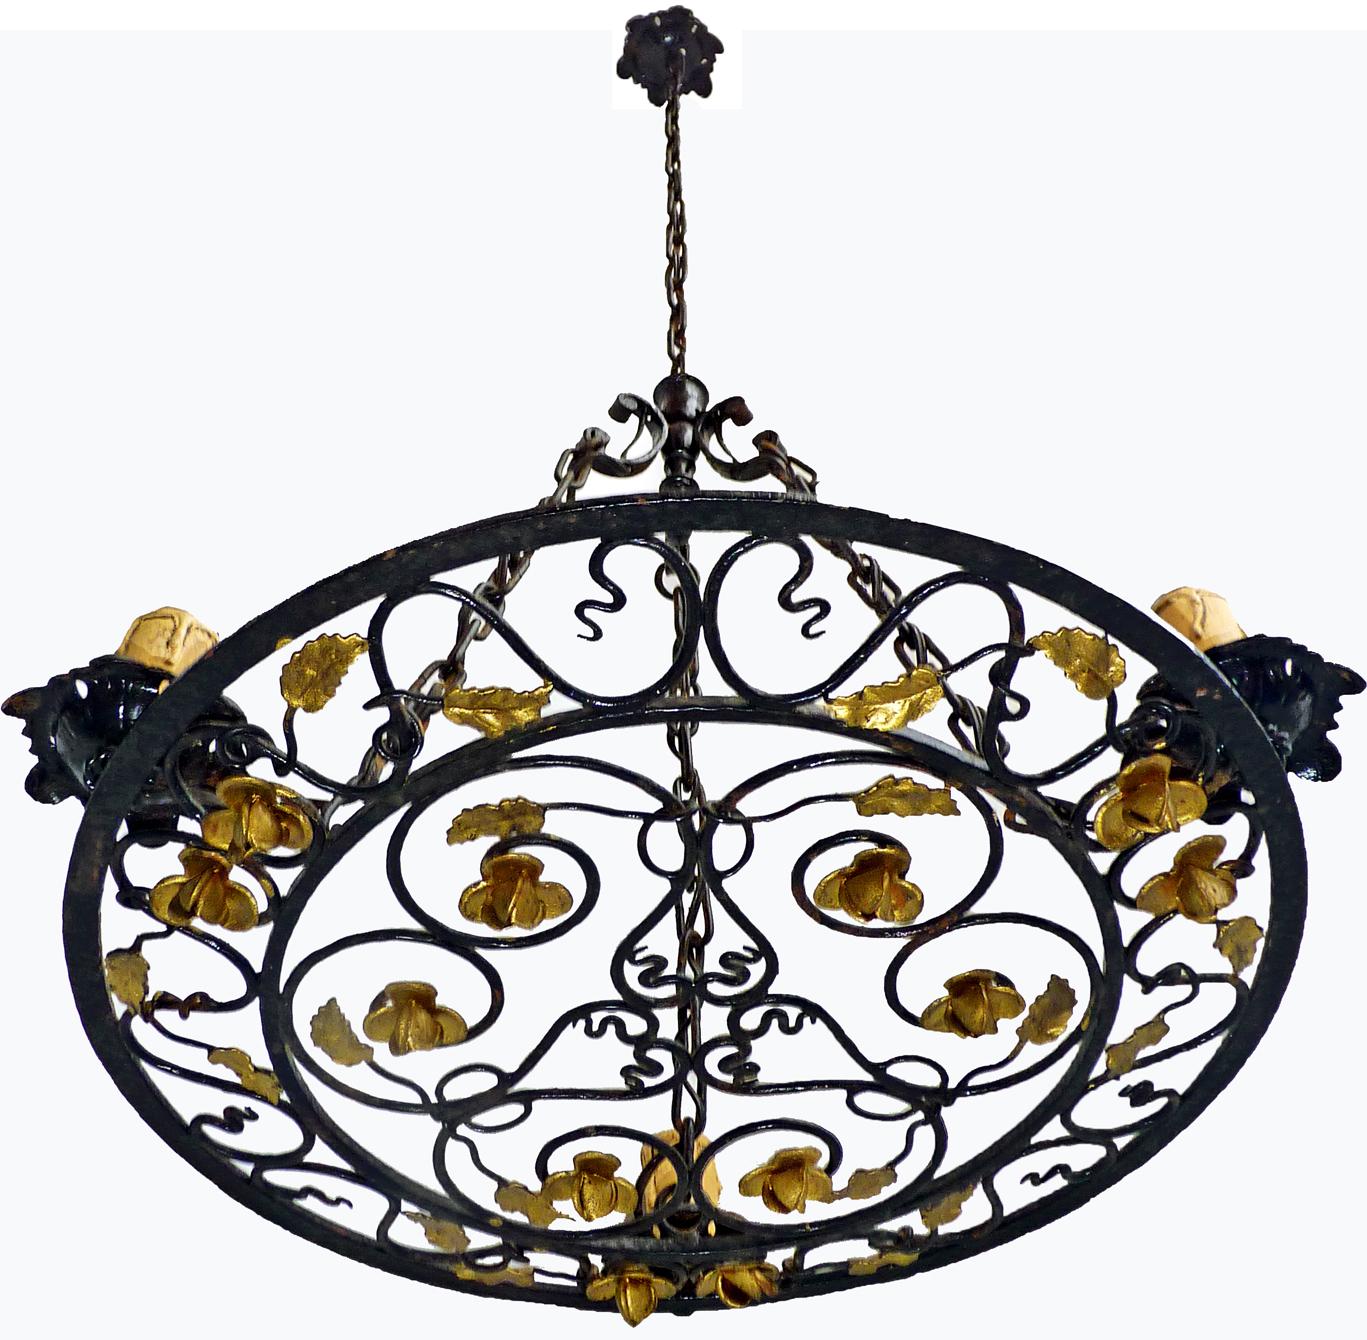 Beautiful original French, 1950 Art Nouveau. Art Deco chandelier or pendant. The hand forged wrought iron frame features intricately hand forged flowers and leaf accents.

Measures:
Width 20.4 in / 52 cm
Height 37.5 in / 95 cm (55 cm + 40 cm)
Weight